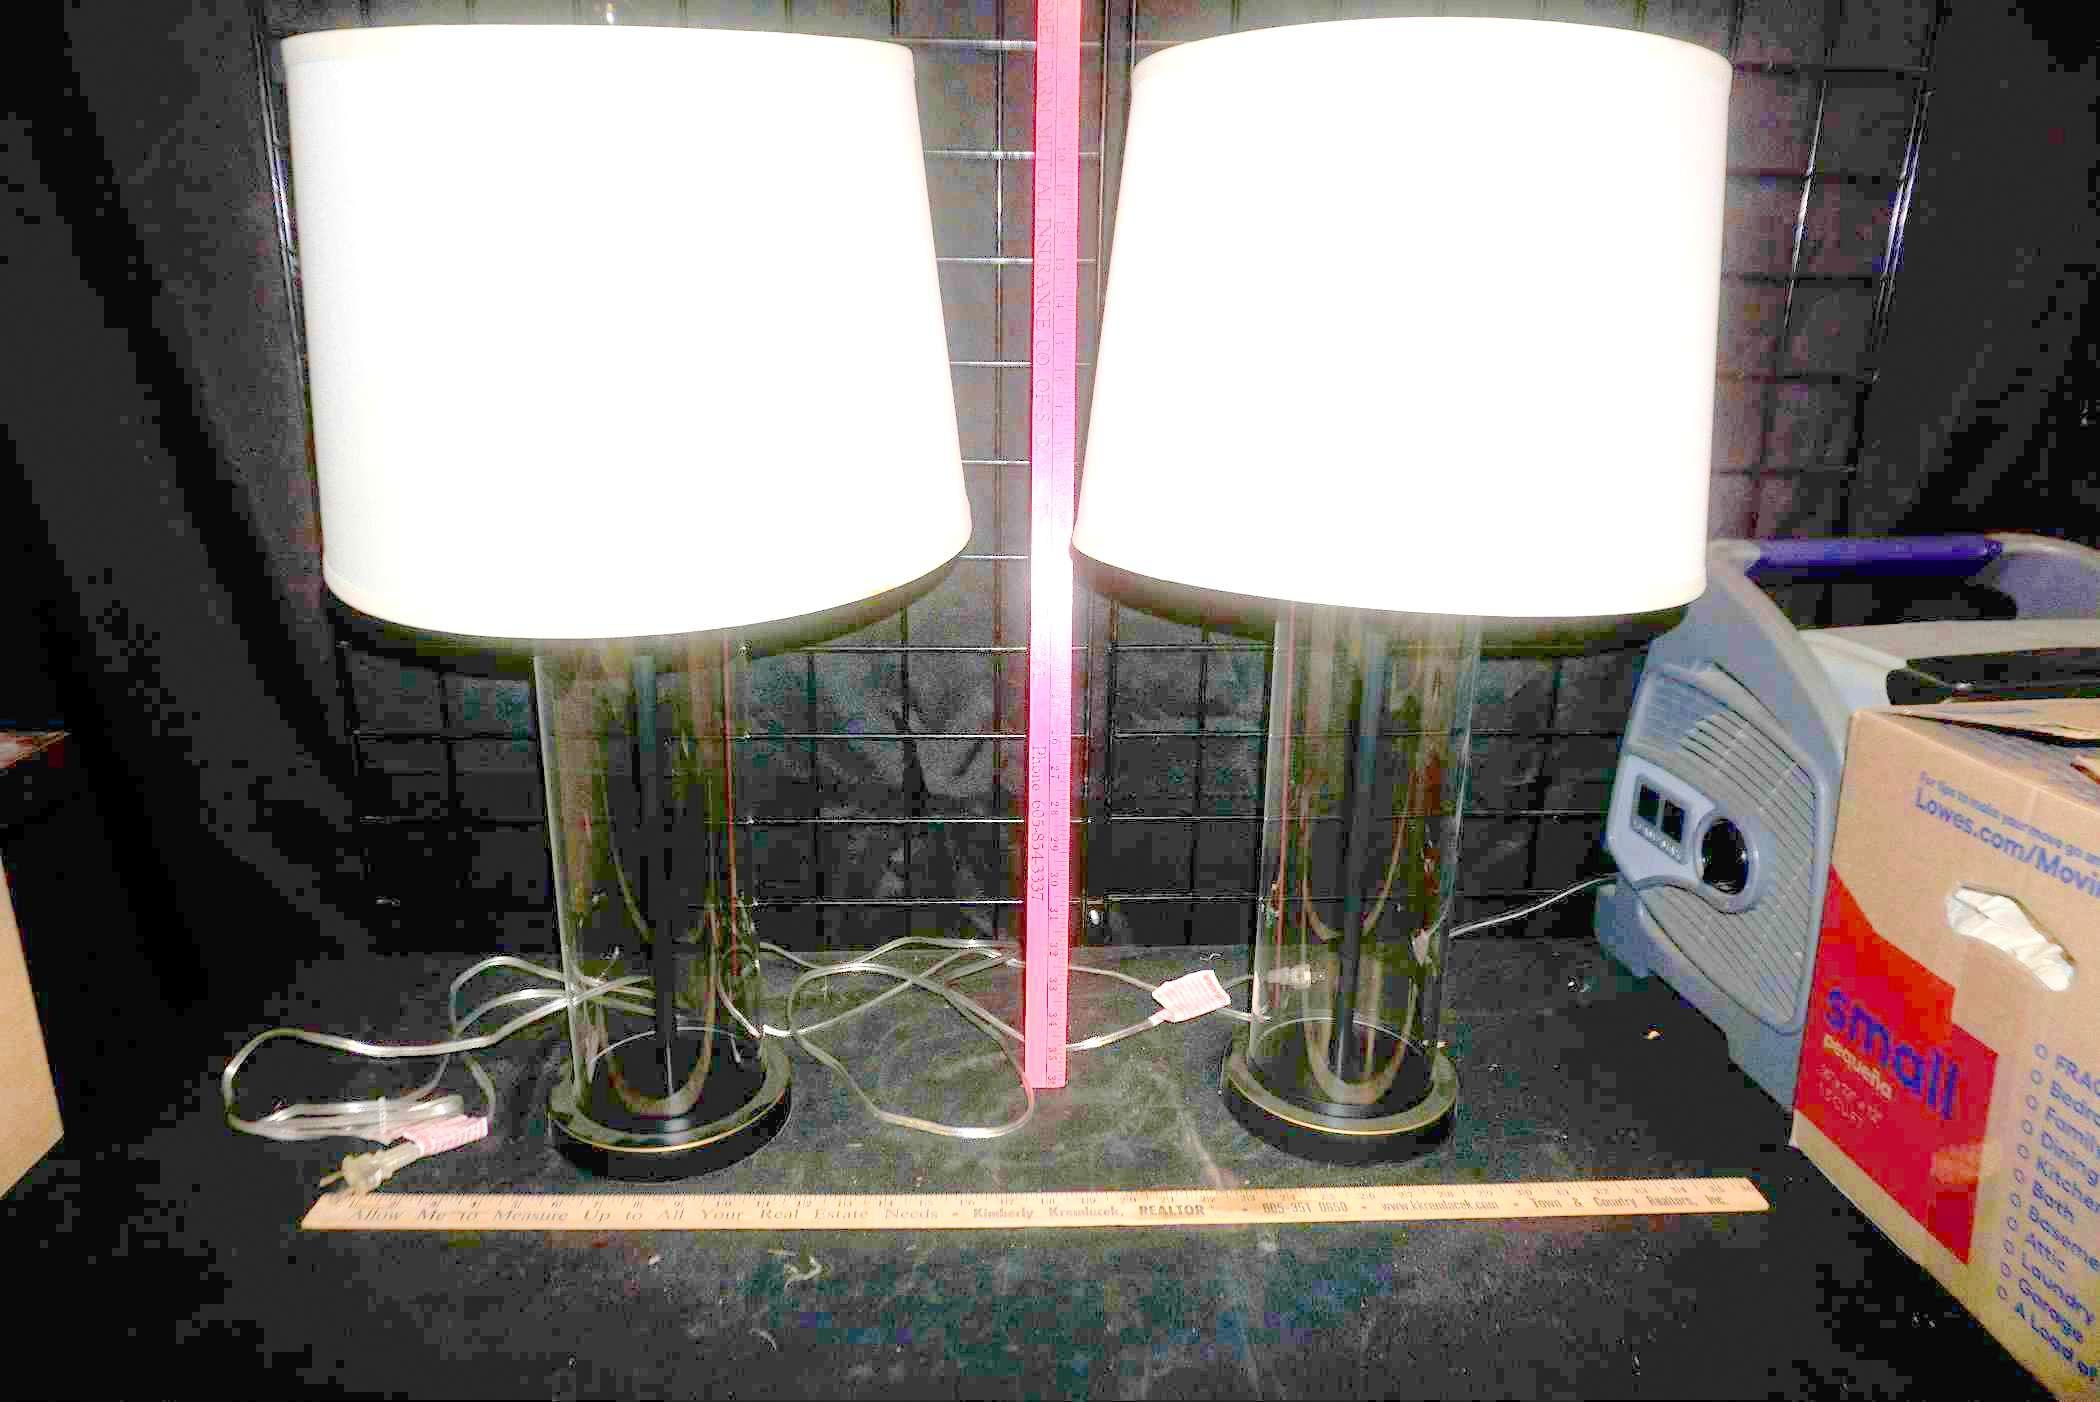 2 - Lauren Lamps (small spots of discoloration on shades)